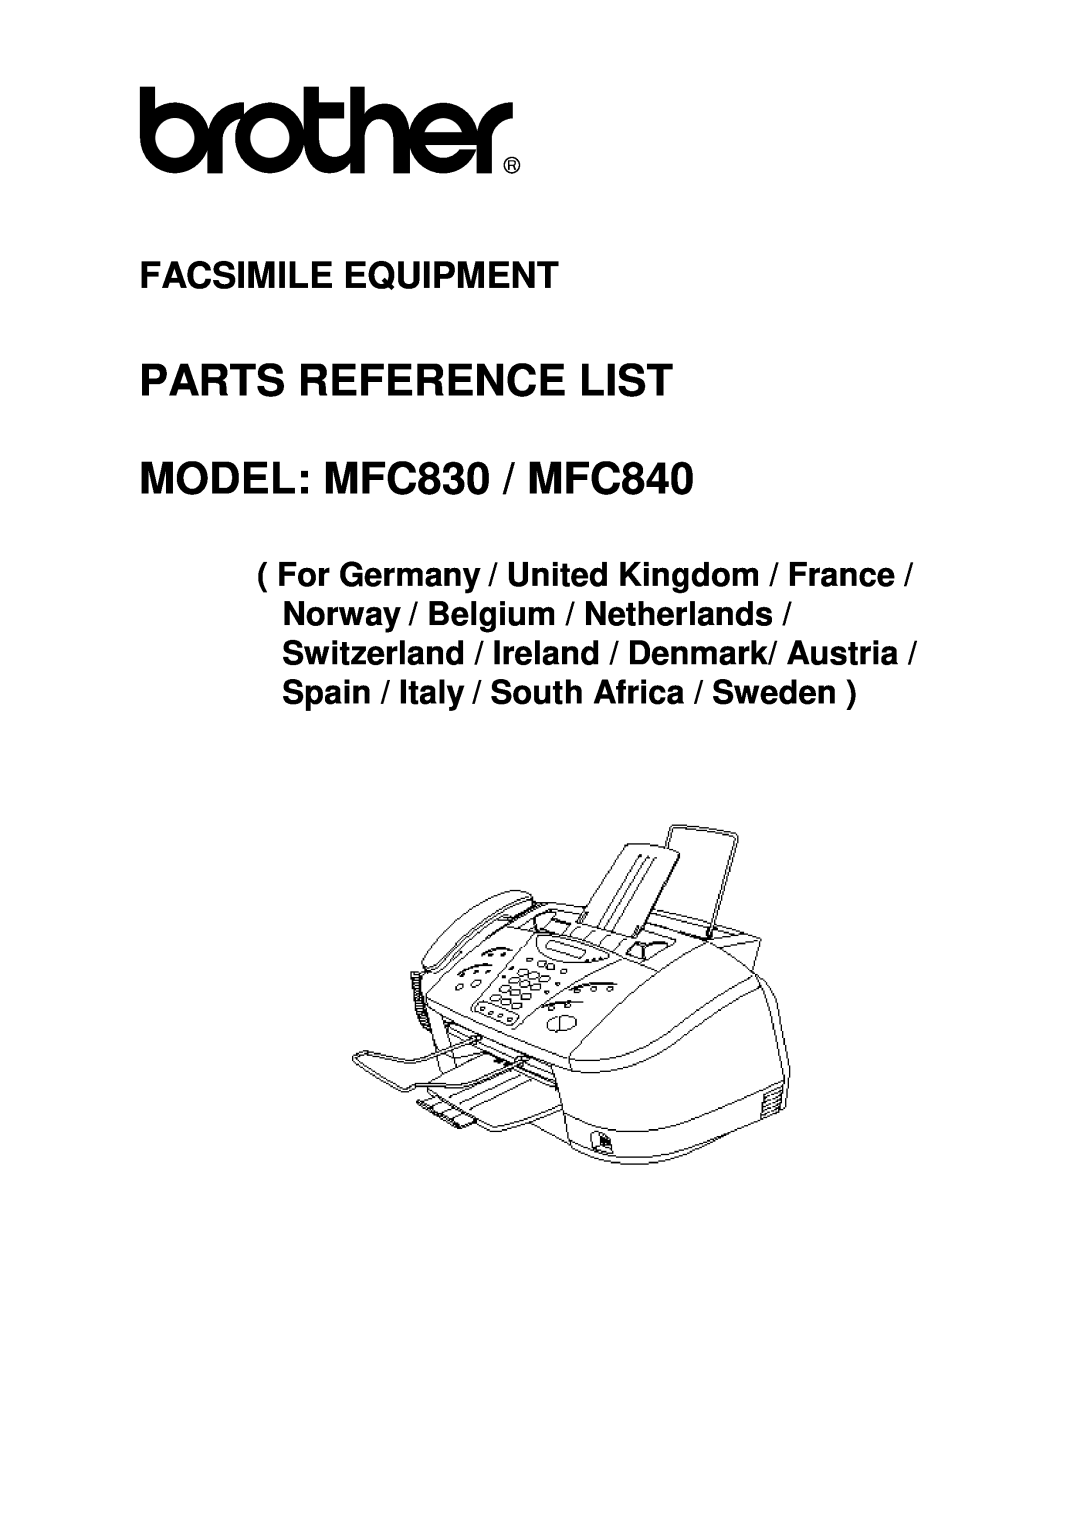 Brother MFC-830, MFC-840 manual PARTS REFERENCE LIST MODEL MFC830 / MFC840, Facsimile Equipment 